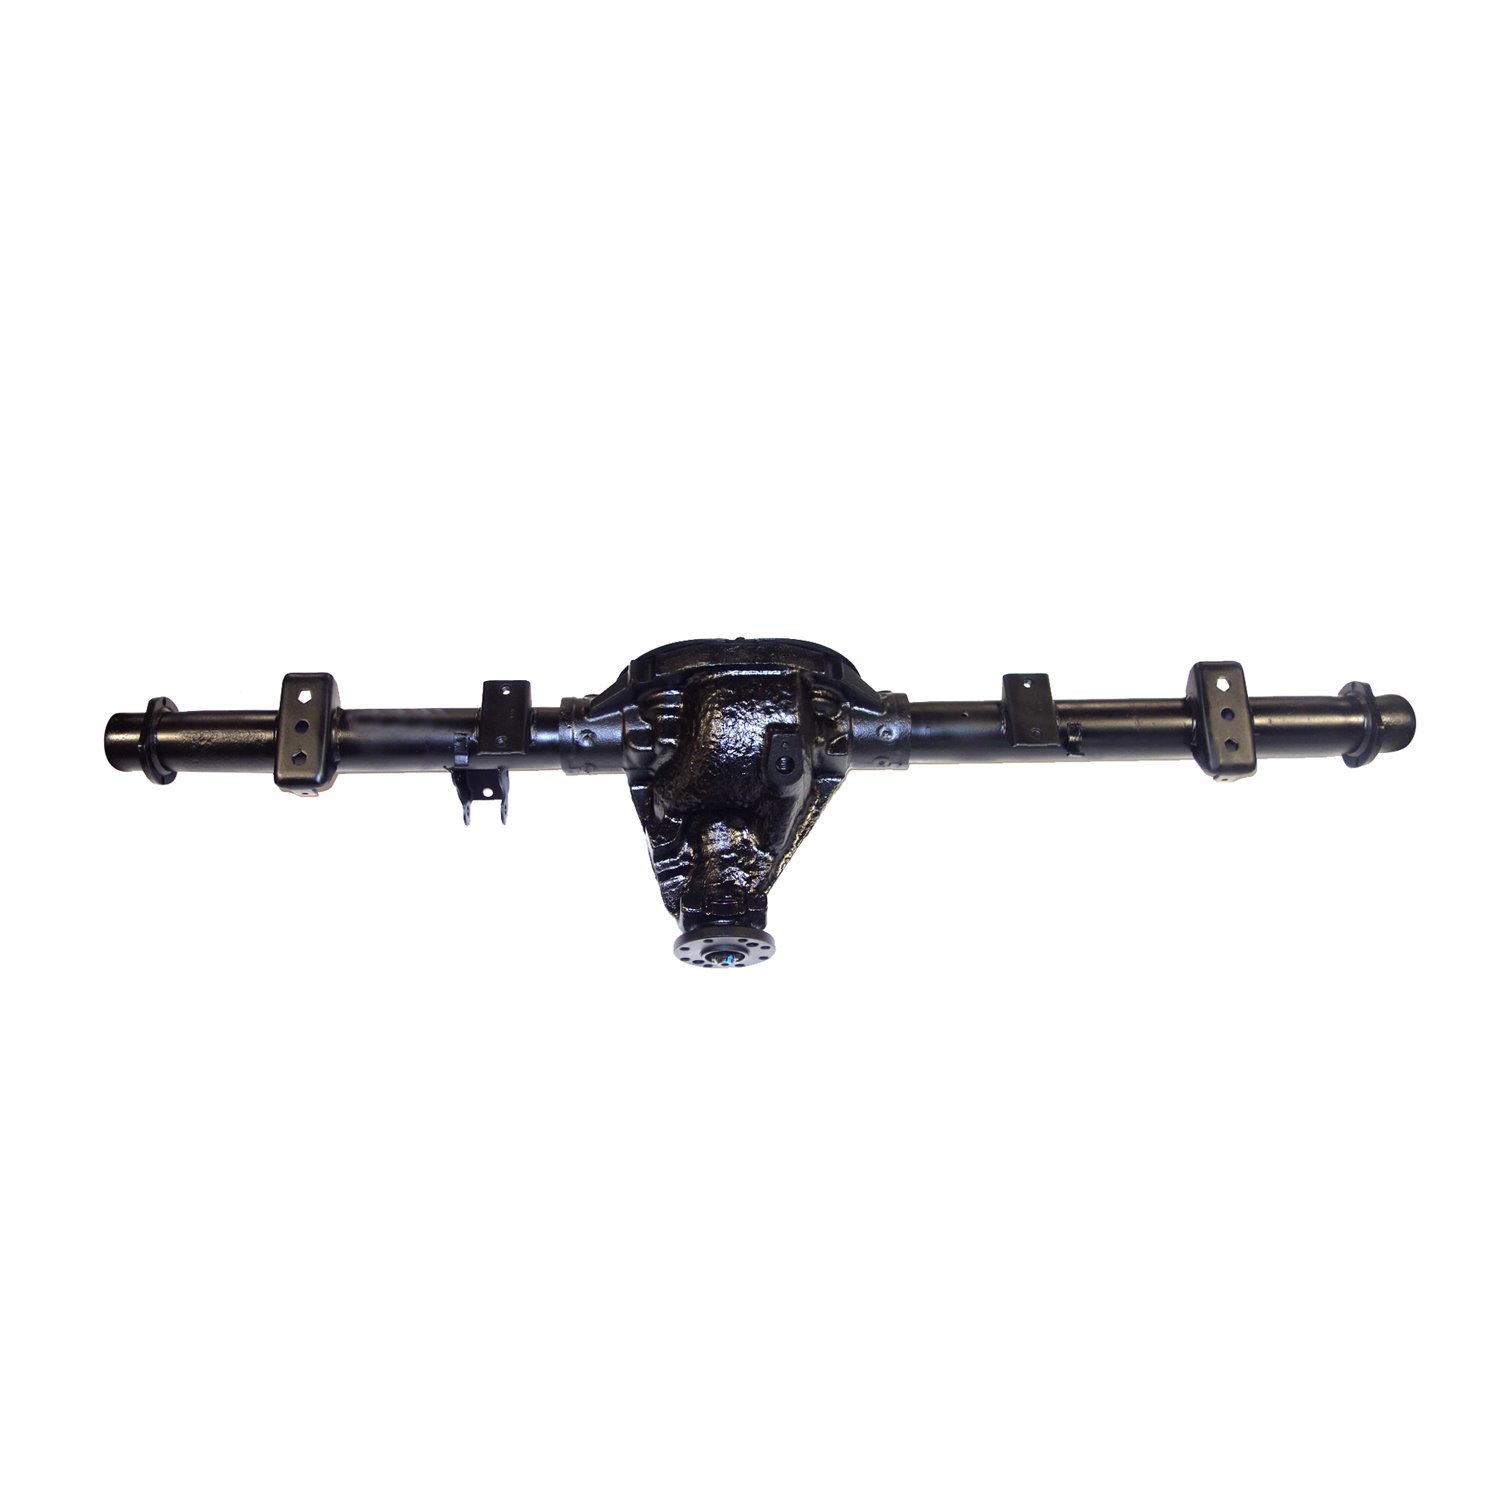 Remanufactured Axle Assy for Chy 8.25" 04-05 Dodge Durango 3.55 , 4x4 w/ Traction Control